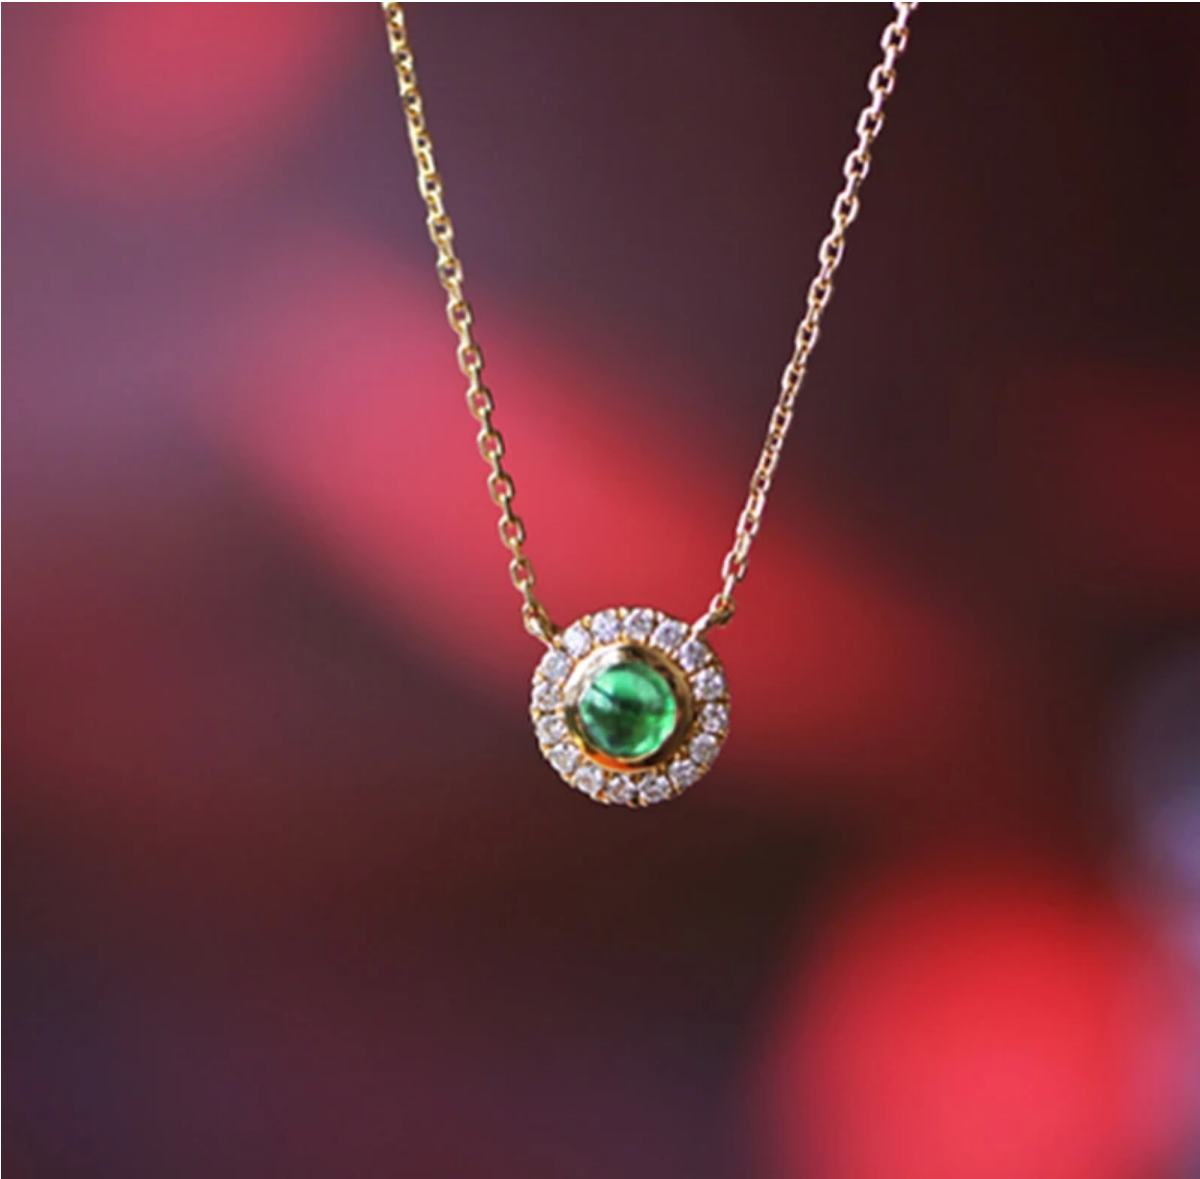 Small Round Pendant Necklace with Green Imitation Opal Stone F